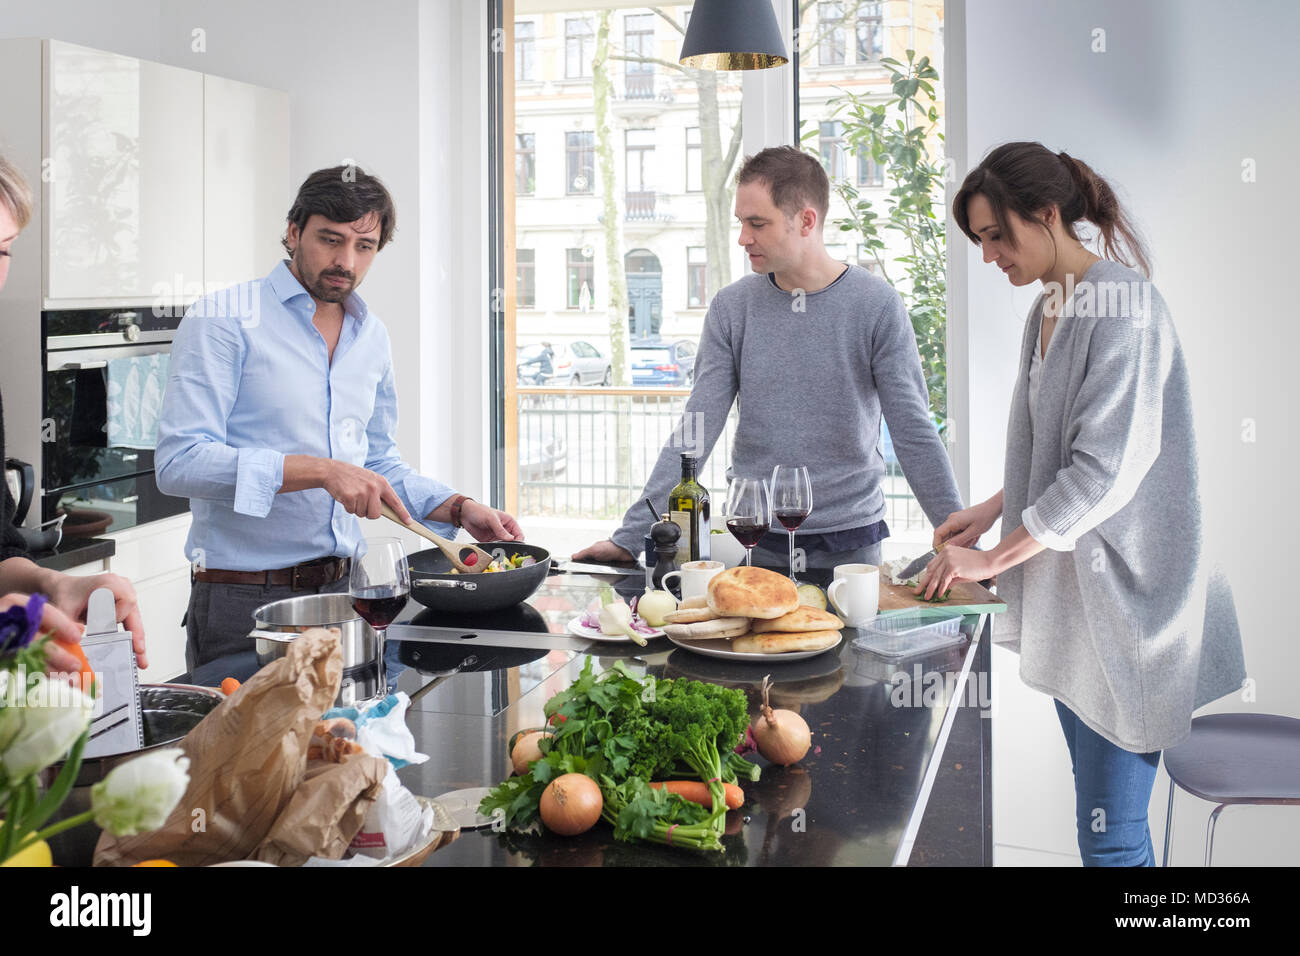 Group of friends preparing vegetarian food together while laughing and enjoying themselves in the kitchen Stock Photo